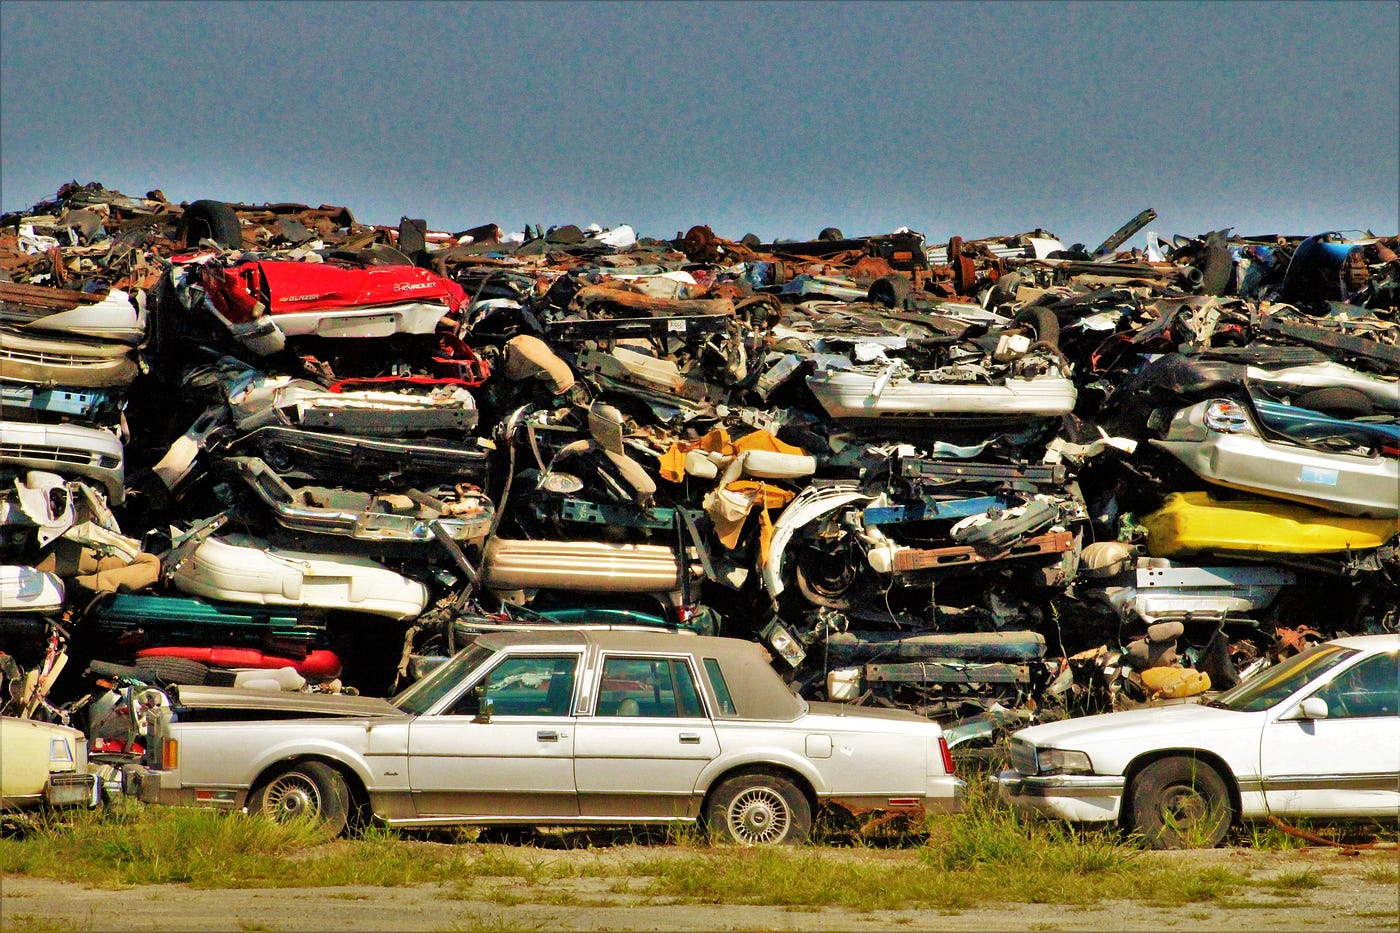 Sell Your Junk Car for Cash Quickly at Cash for Cars Quick (Riverside)!